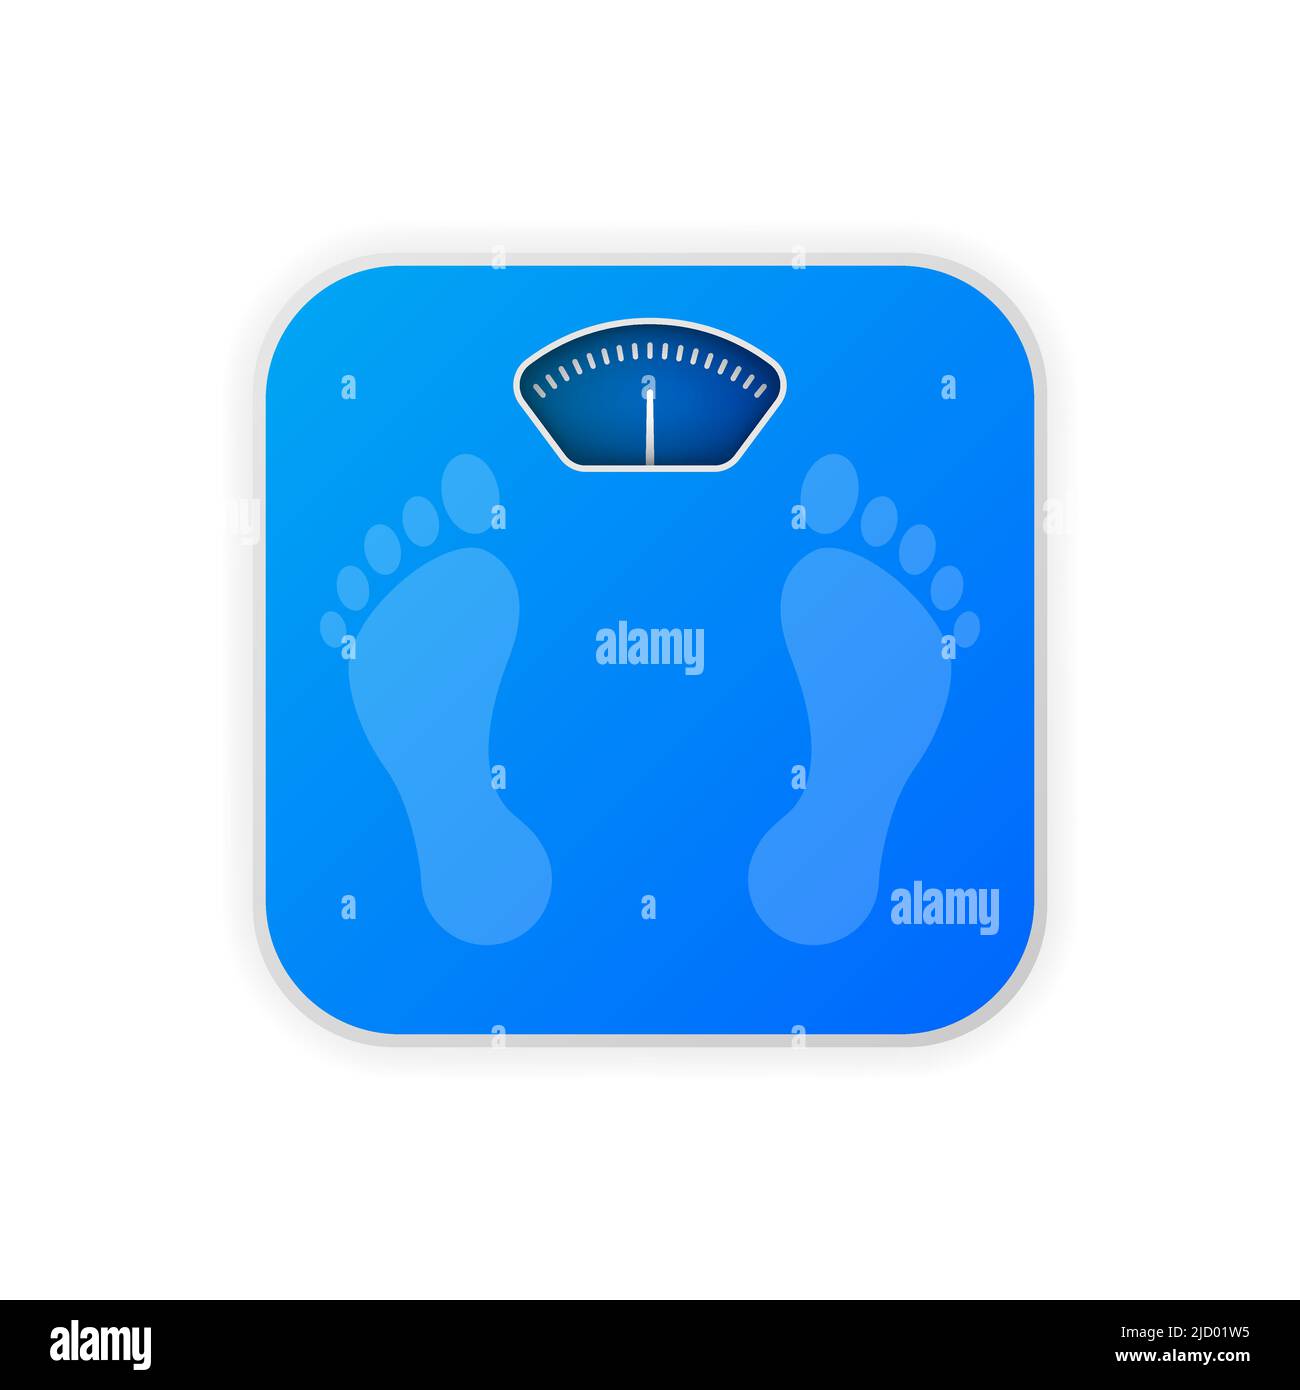 Weight scales and people weighing yes and no Stock Vector by